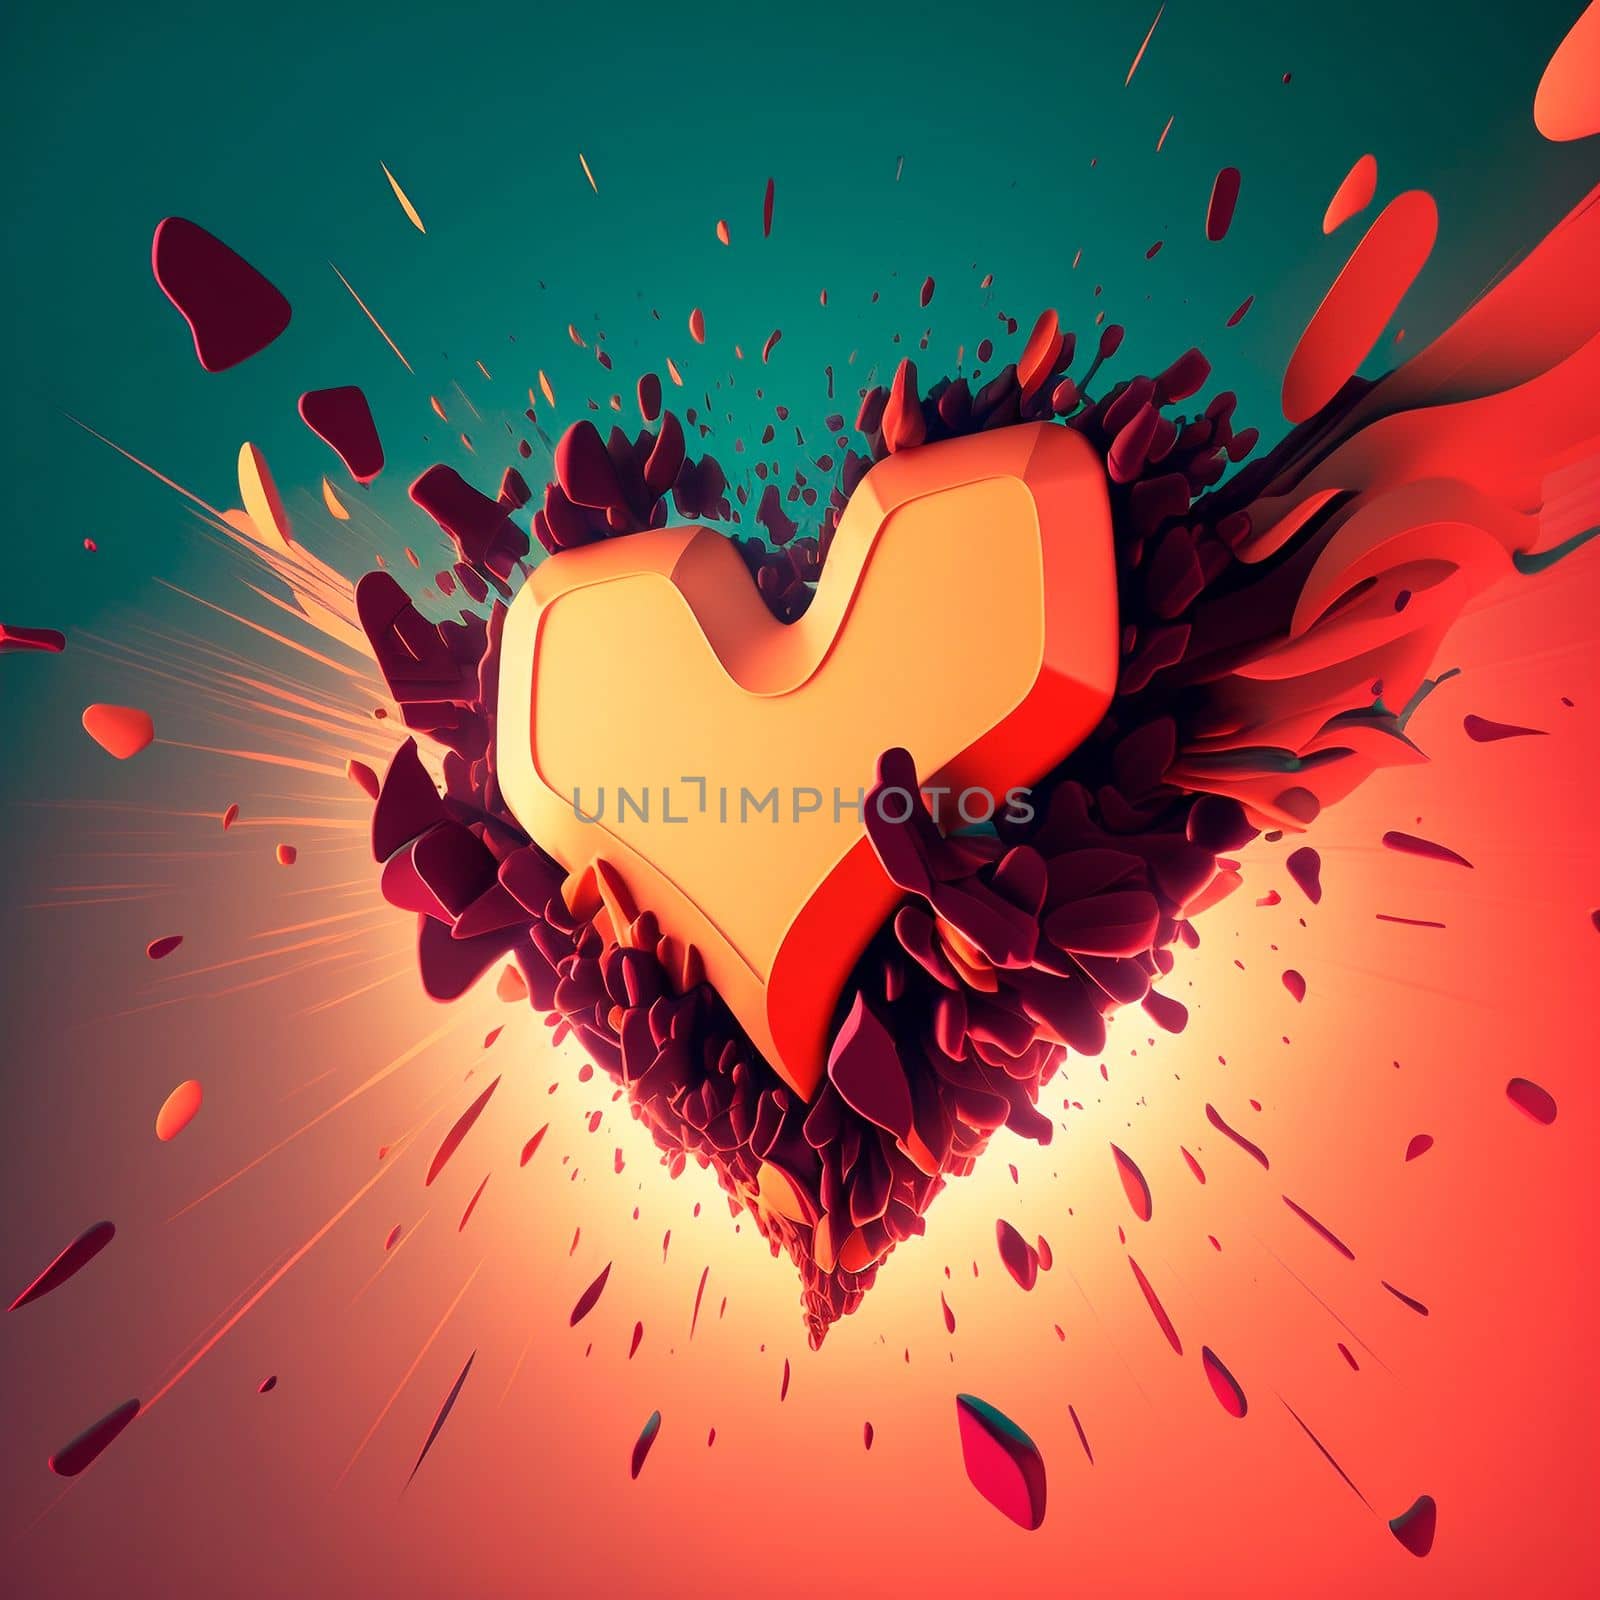 Abstract illustration of the heart against the background of an explosion of colors by NeuroSky